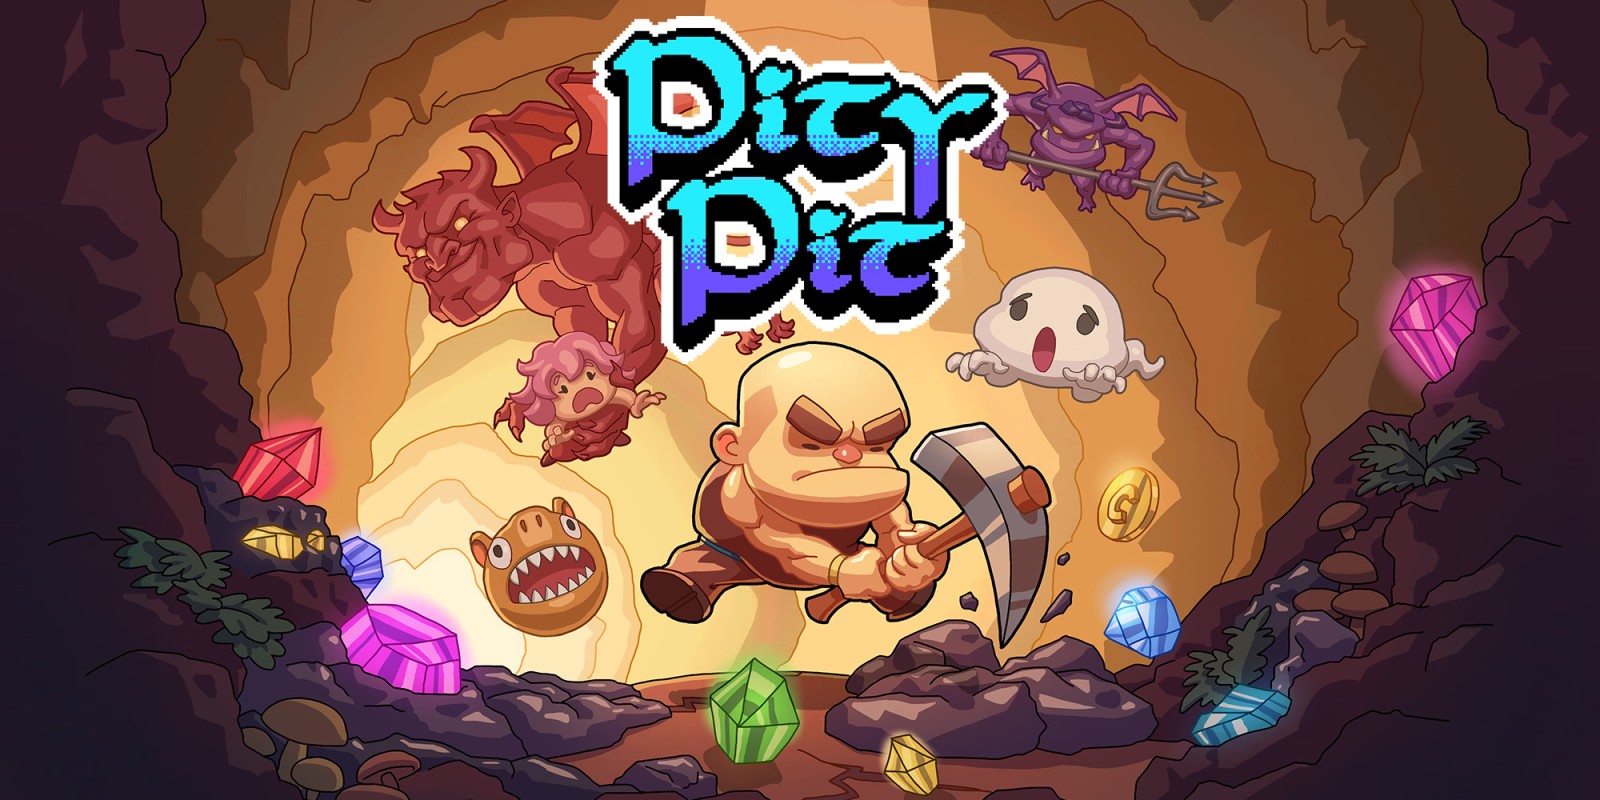 download pit people nintendo switch